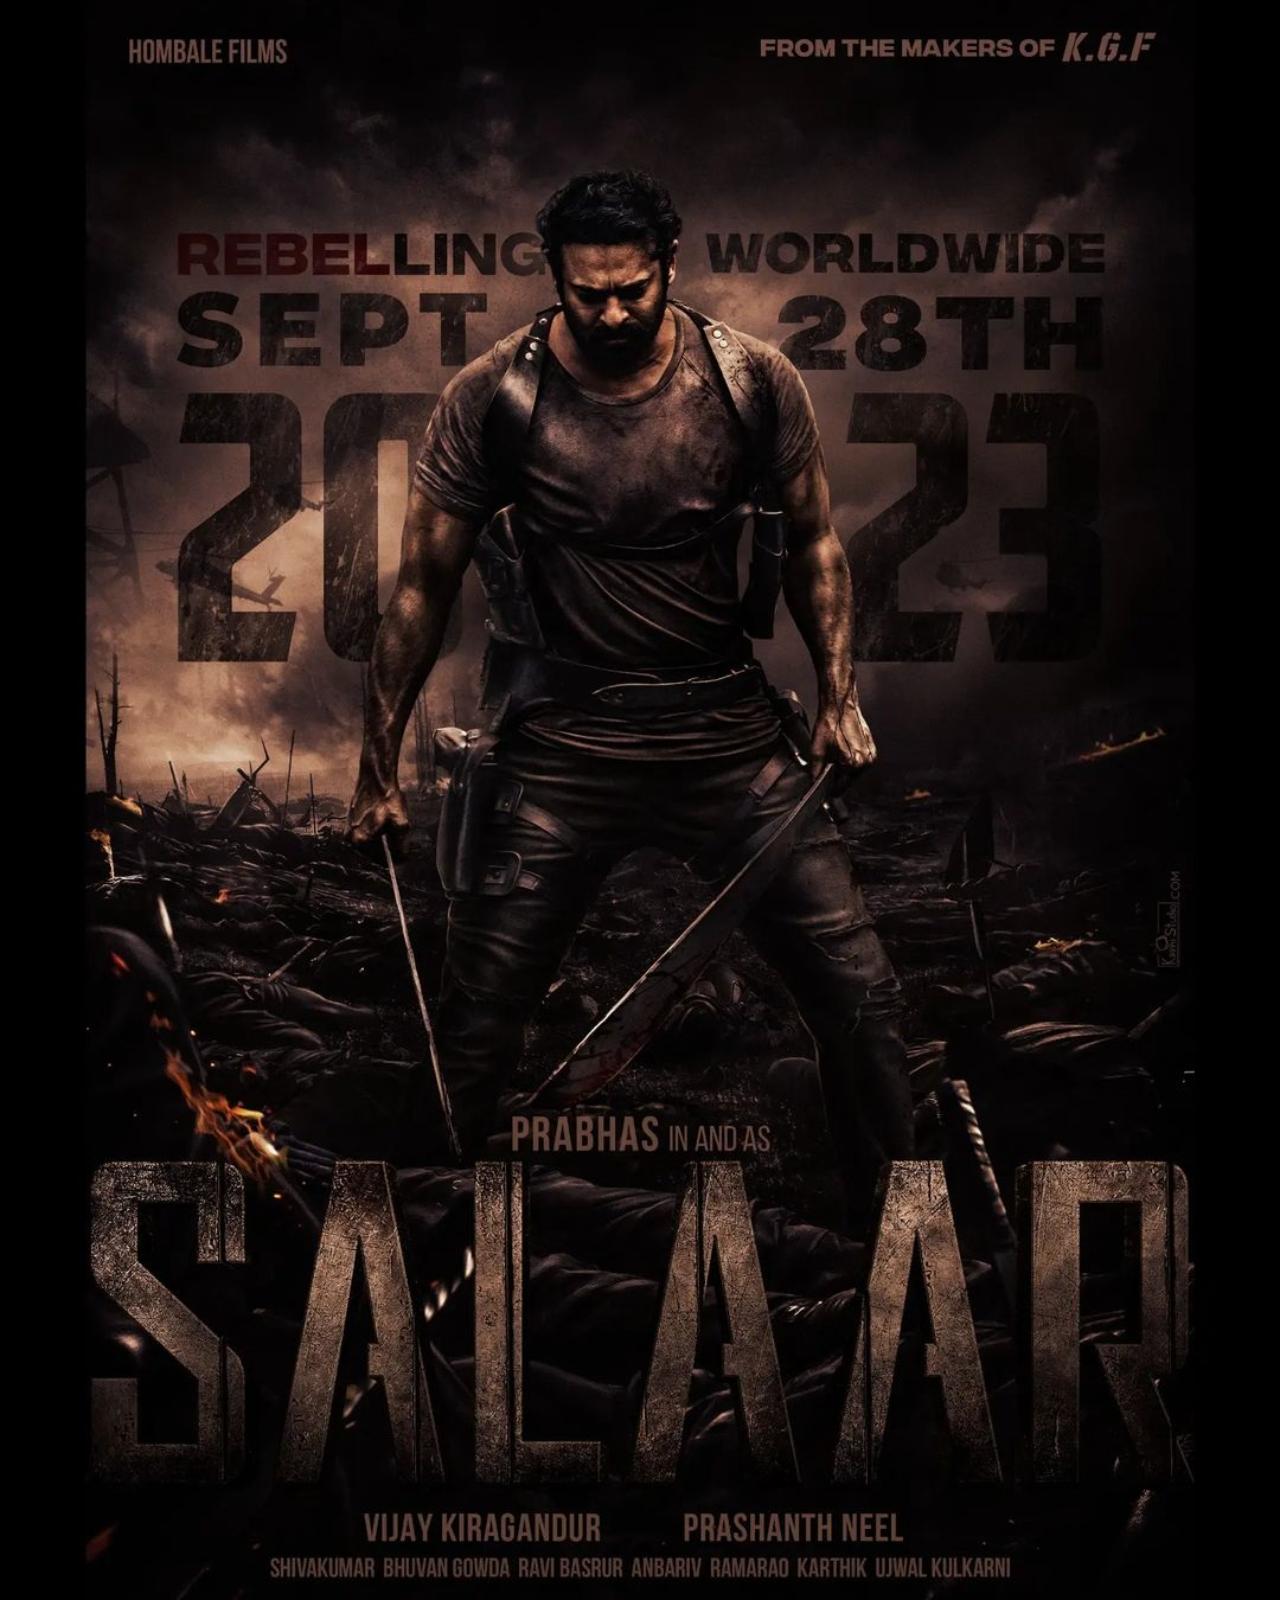 Salaar (September 28, 2023)
After giving a massive hit to Kannada cinemas, Prasanth Neel is back with the action film, 'Salaar'. Headlined by Prabhas as the titular character, along with Prithviraj Sukumaran, Shruti Haasan, and Jagapathi Babu. The film is all set to release on September 28, 2023.